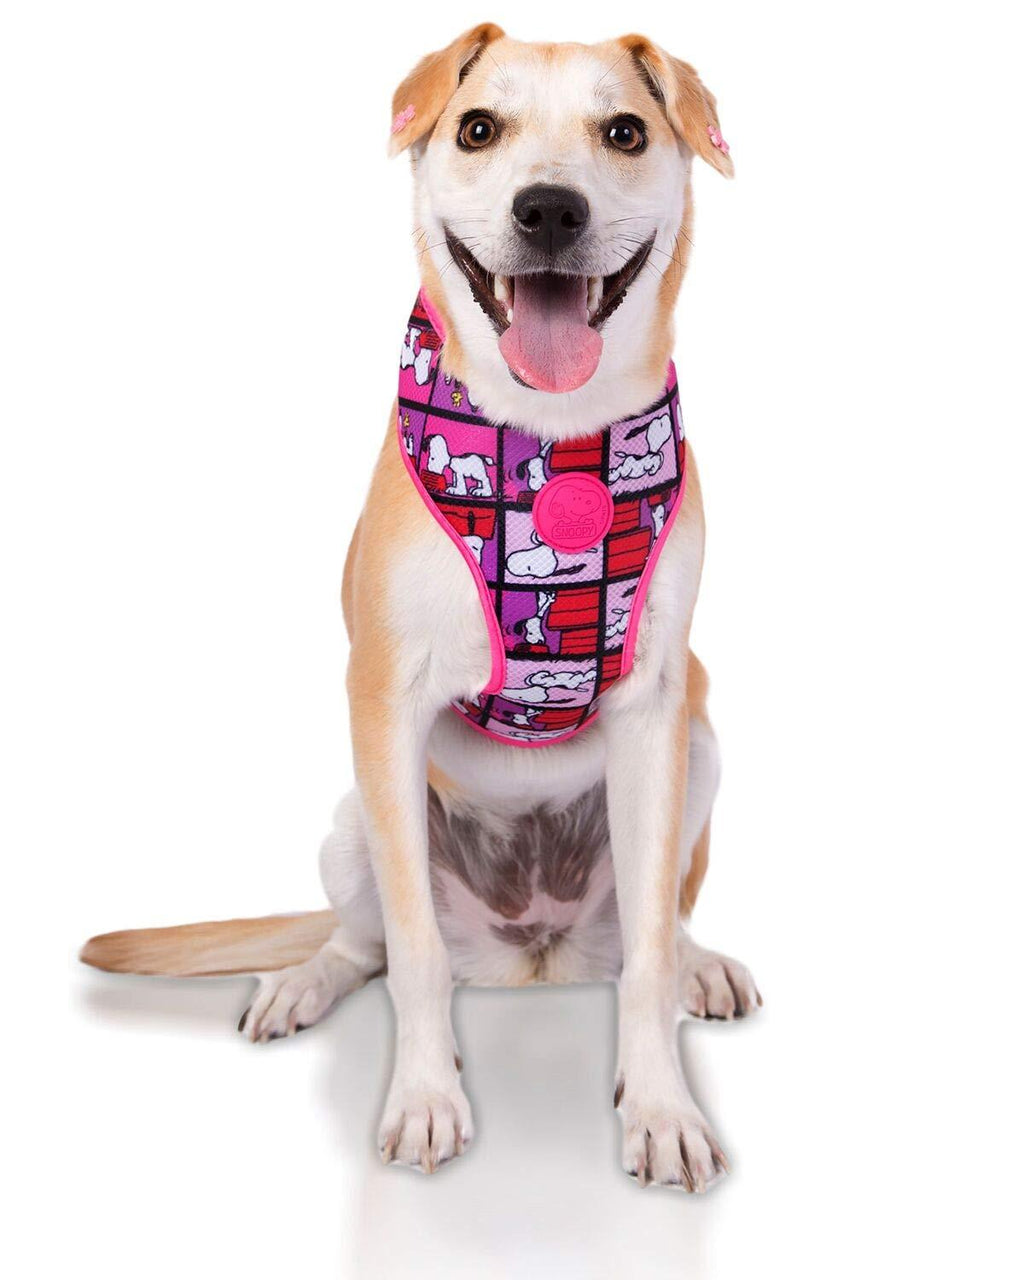 [Australia] - ZOOZ PETS Snoopy Dog Harness Small Dogs and Large Breeds Mesh Dog Harnesses Puppy to XL Dogs XL Safe Adjustable Harness for Pets Comfortable Fit Soft Safety Tested Designed by Zoozpets, Snoopy Brand FilmColorPink XS 